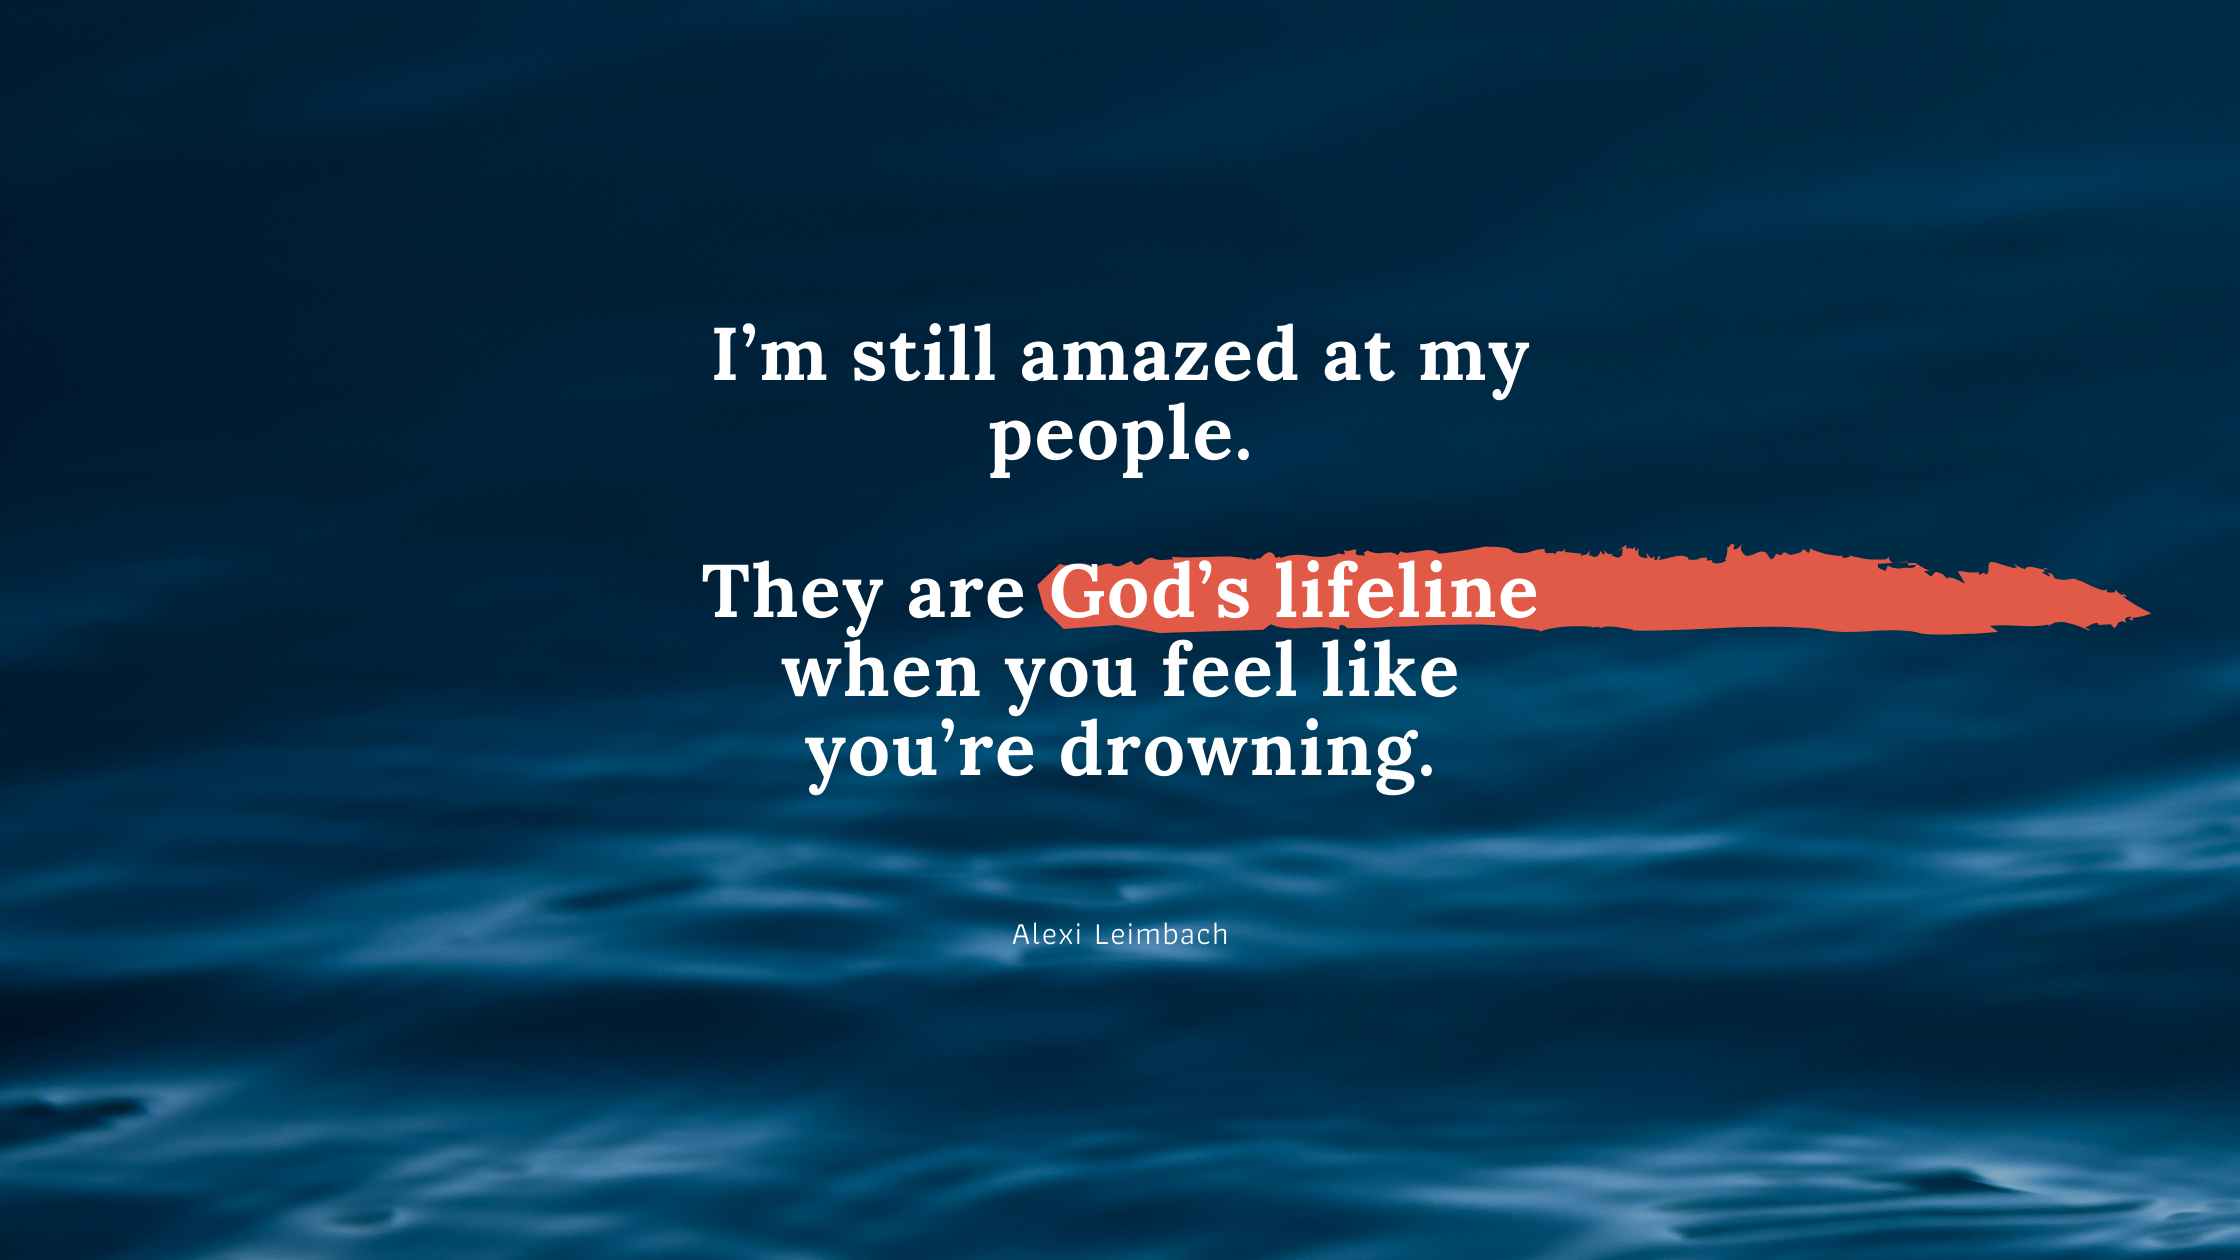 I’m still amazed at my people. They are God’s lifeline when you feel like you’re drowning.